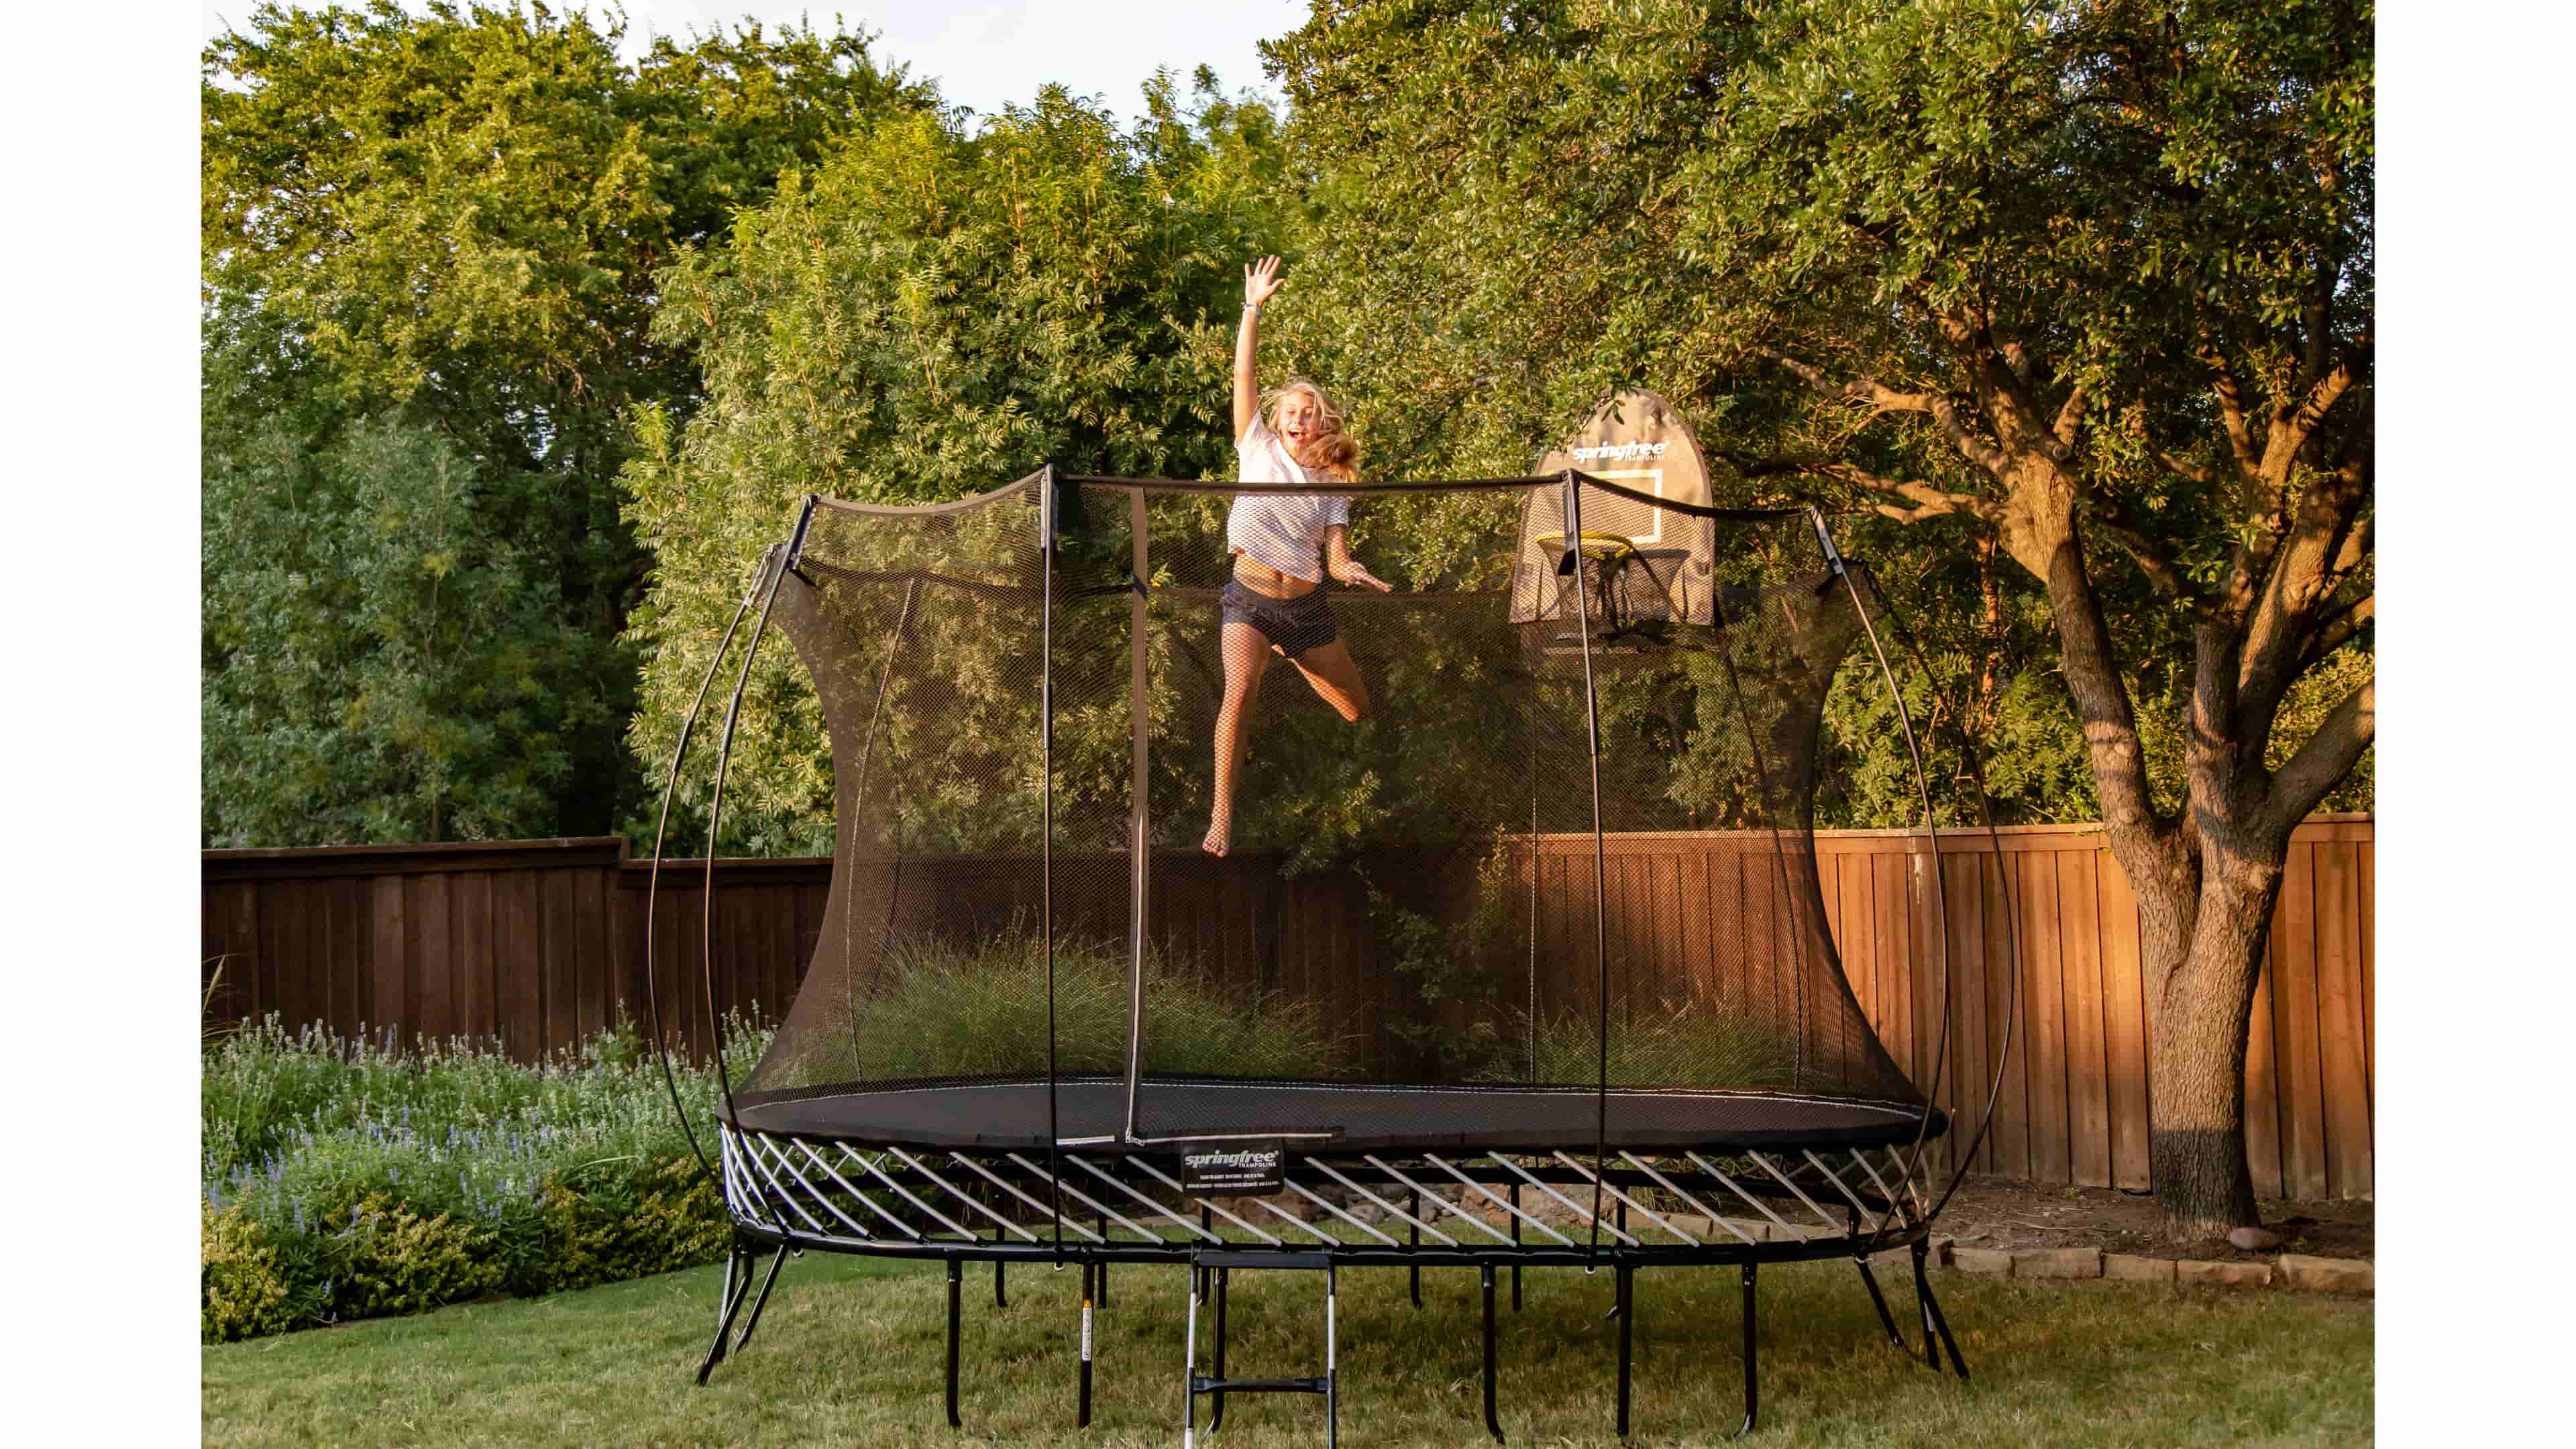 Treadmill or Trampoline? Make the Smart Investment